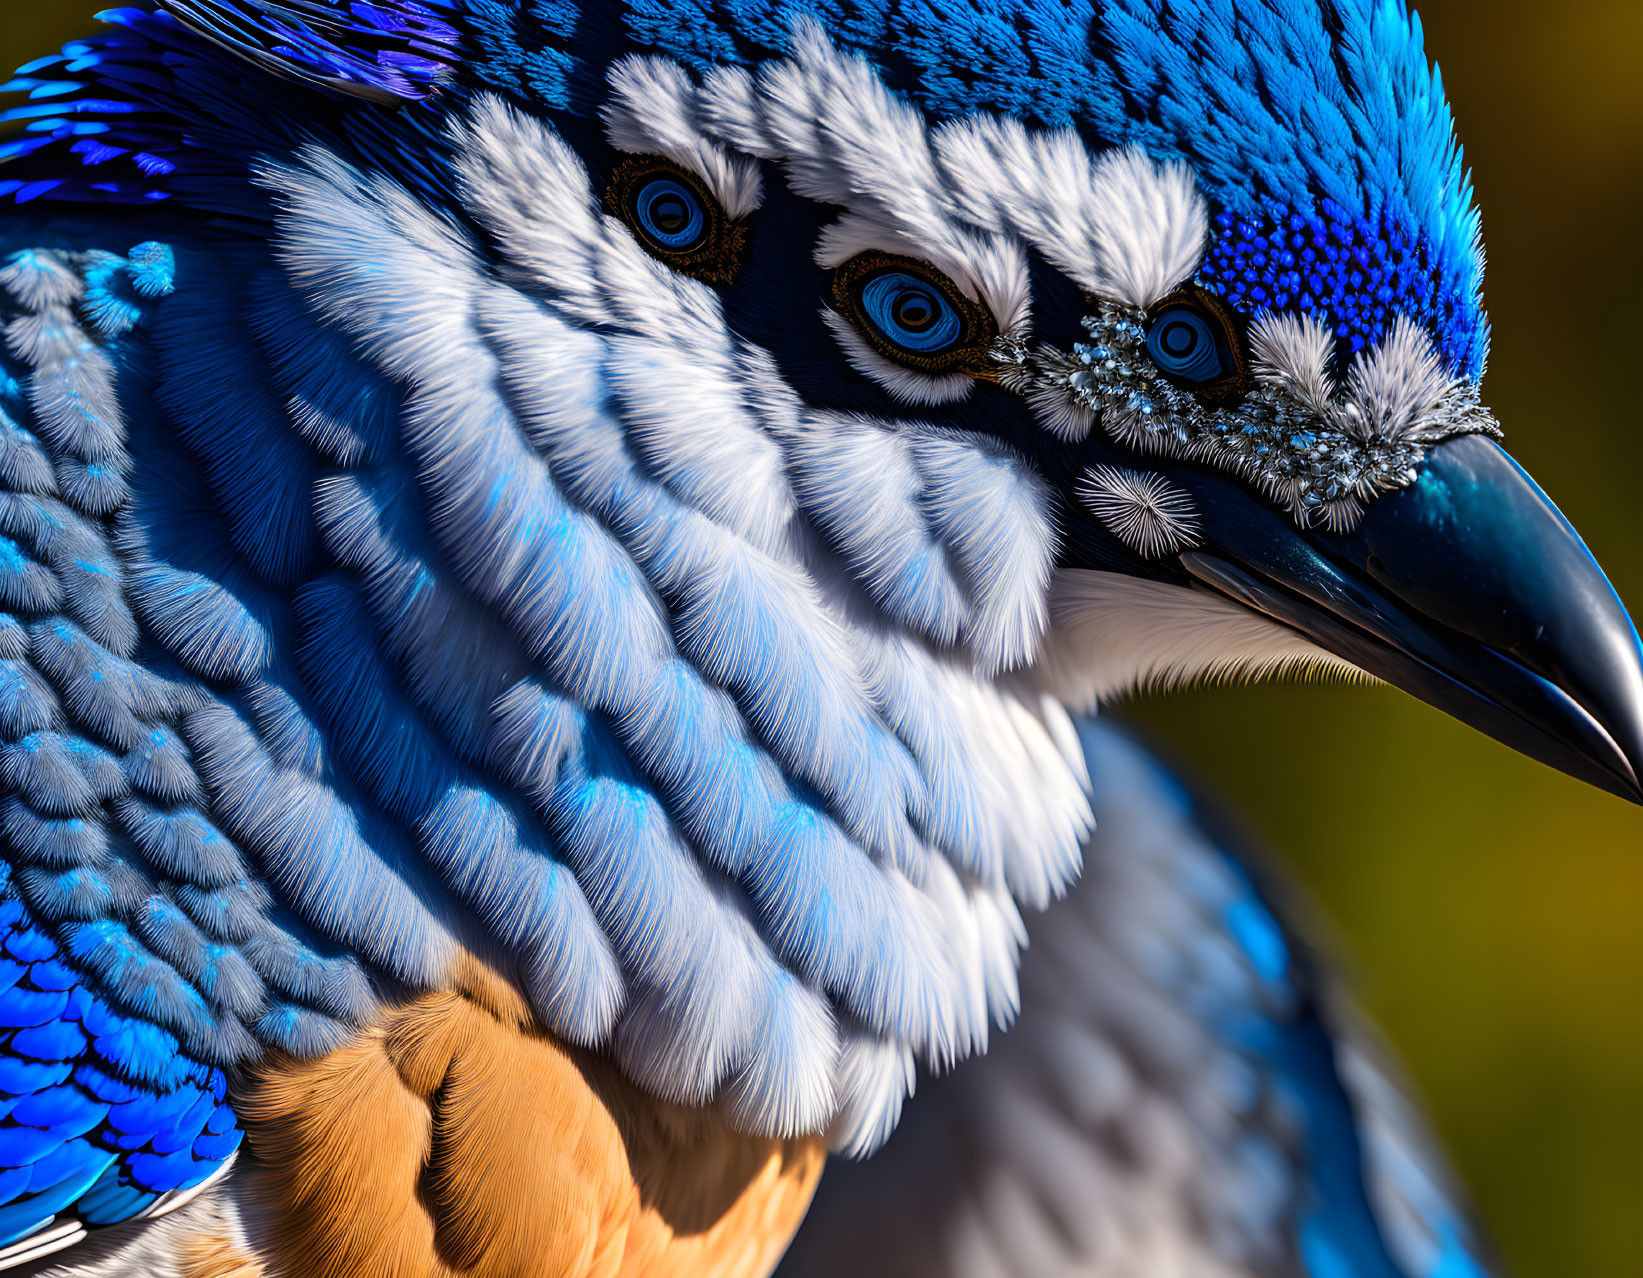 Colorful bird with vibrant blue feathers and intricate patterns.